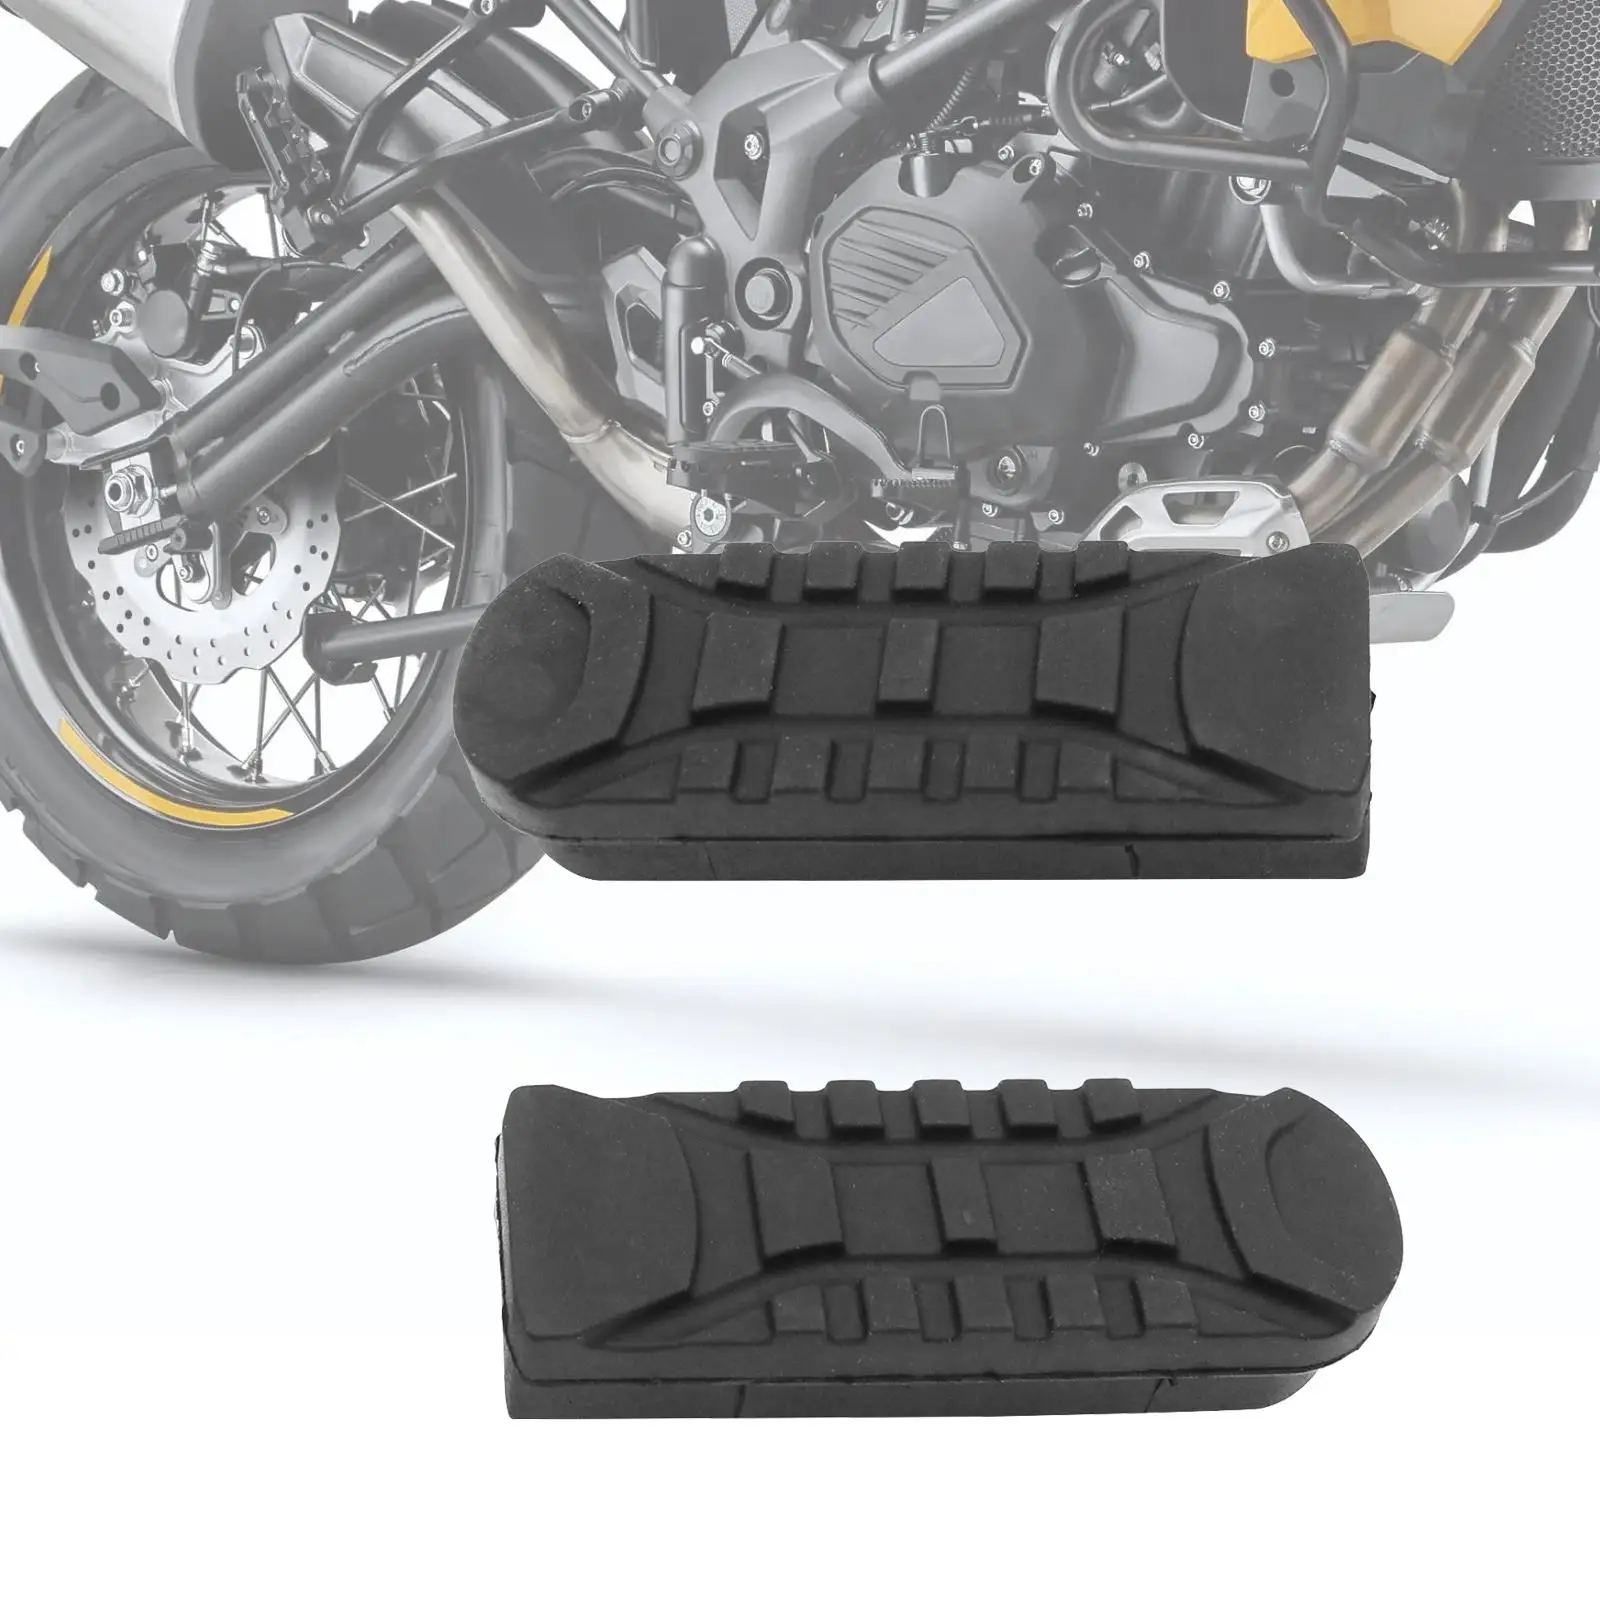 2x Motorcycle Front Rubber Footrest Coves Durable Directly Replace Footrest - $16.90